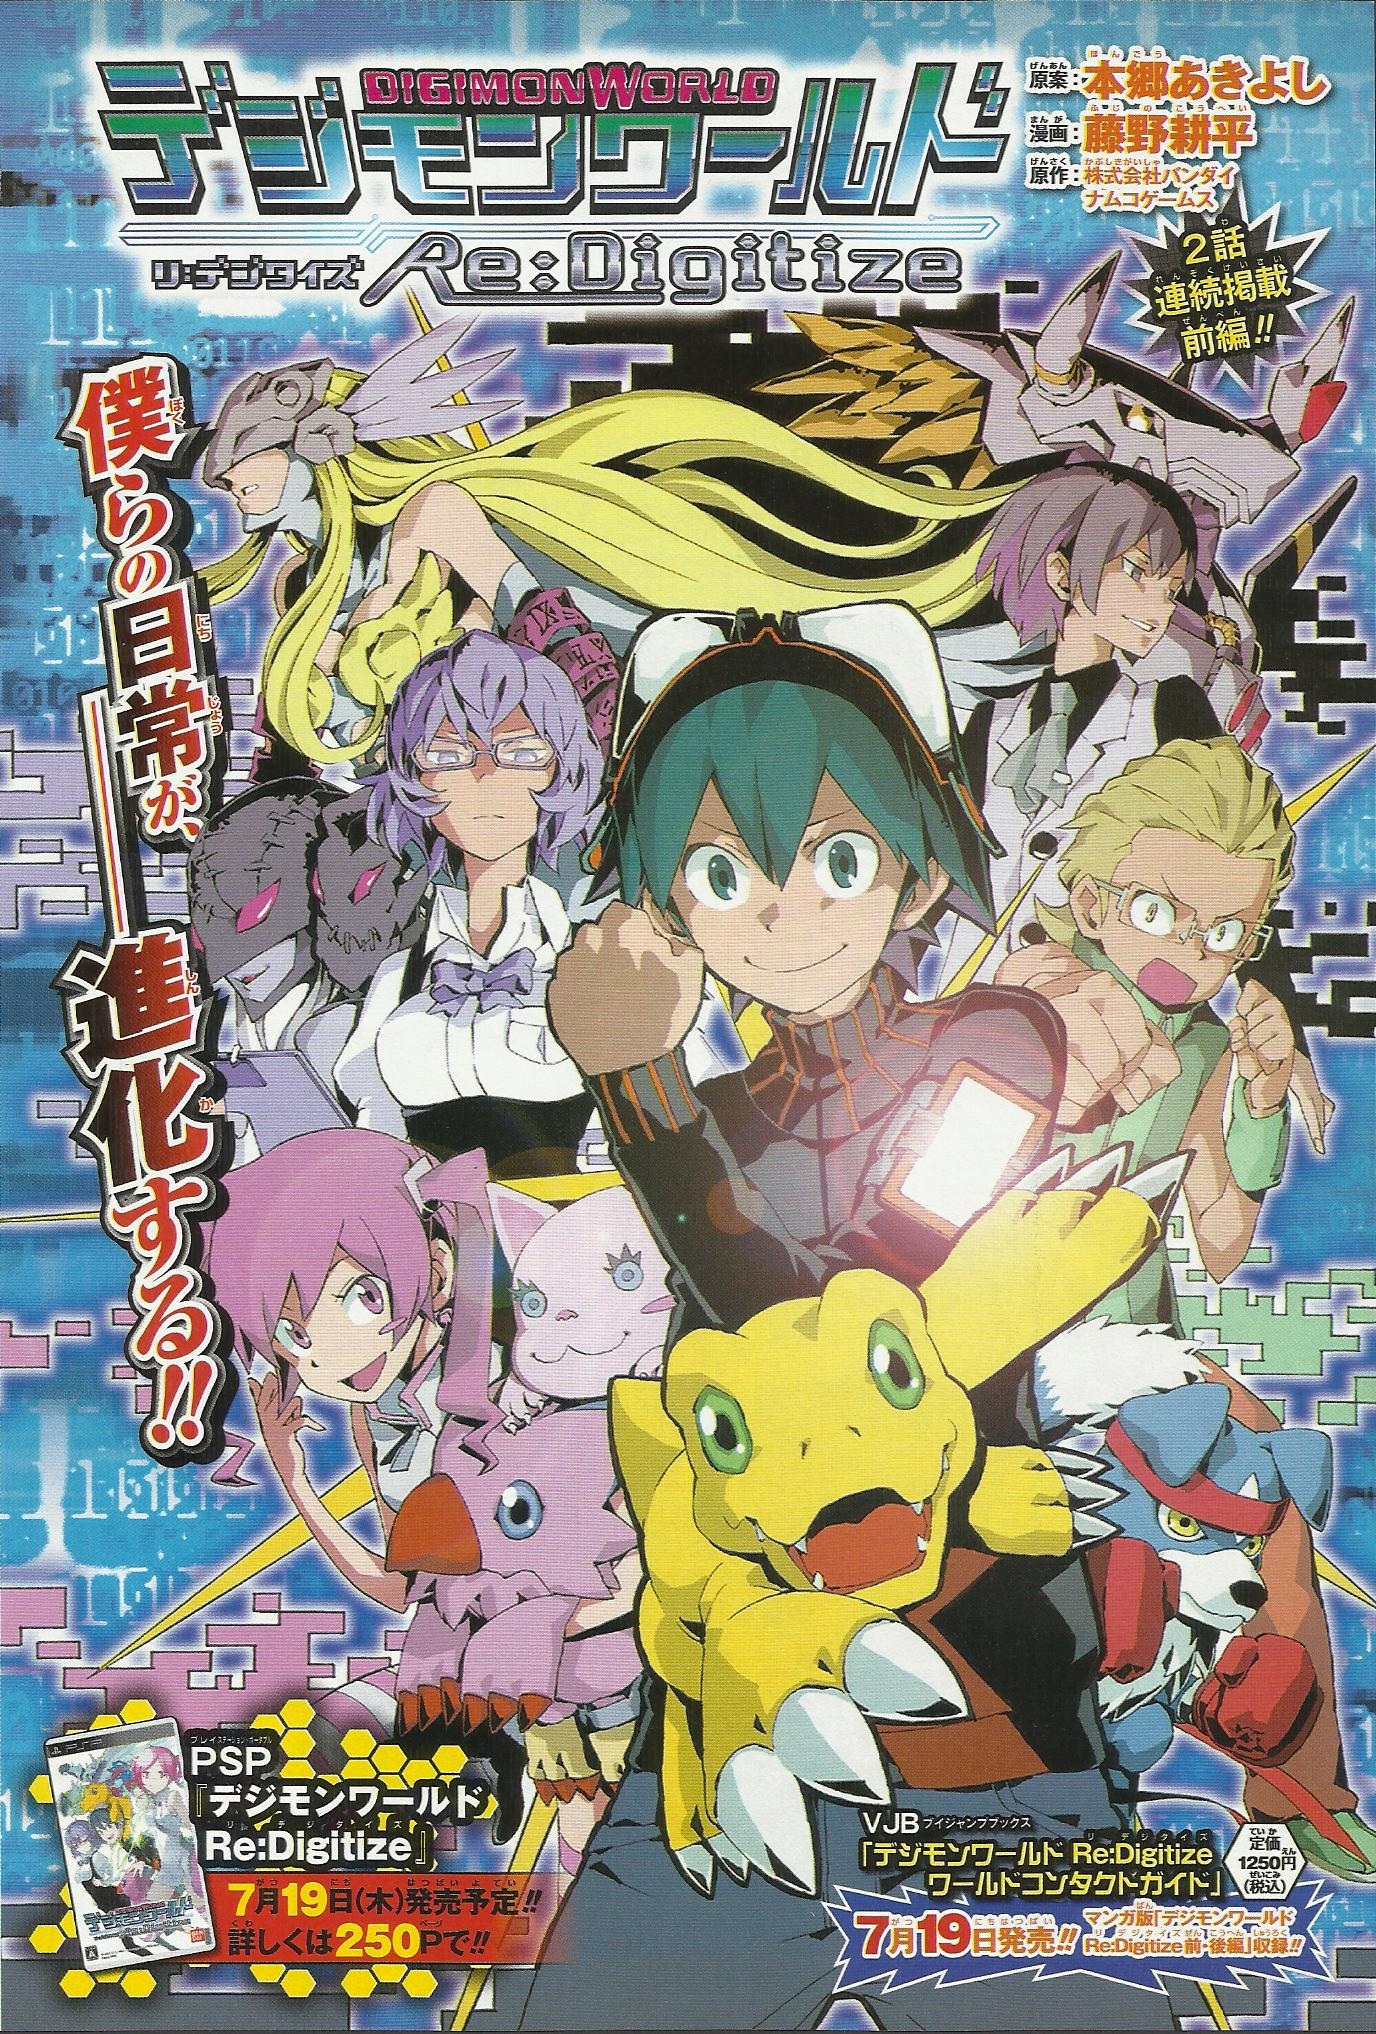 digimon-world-re-digitize-manga-digimon-wiki-go-on-an-adventure-to-tame-the-frontier-and